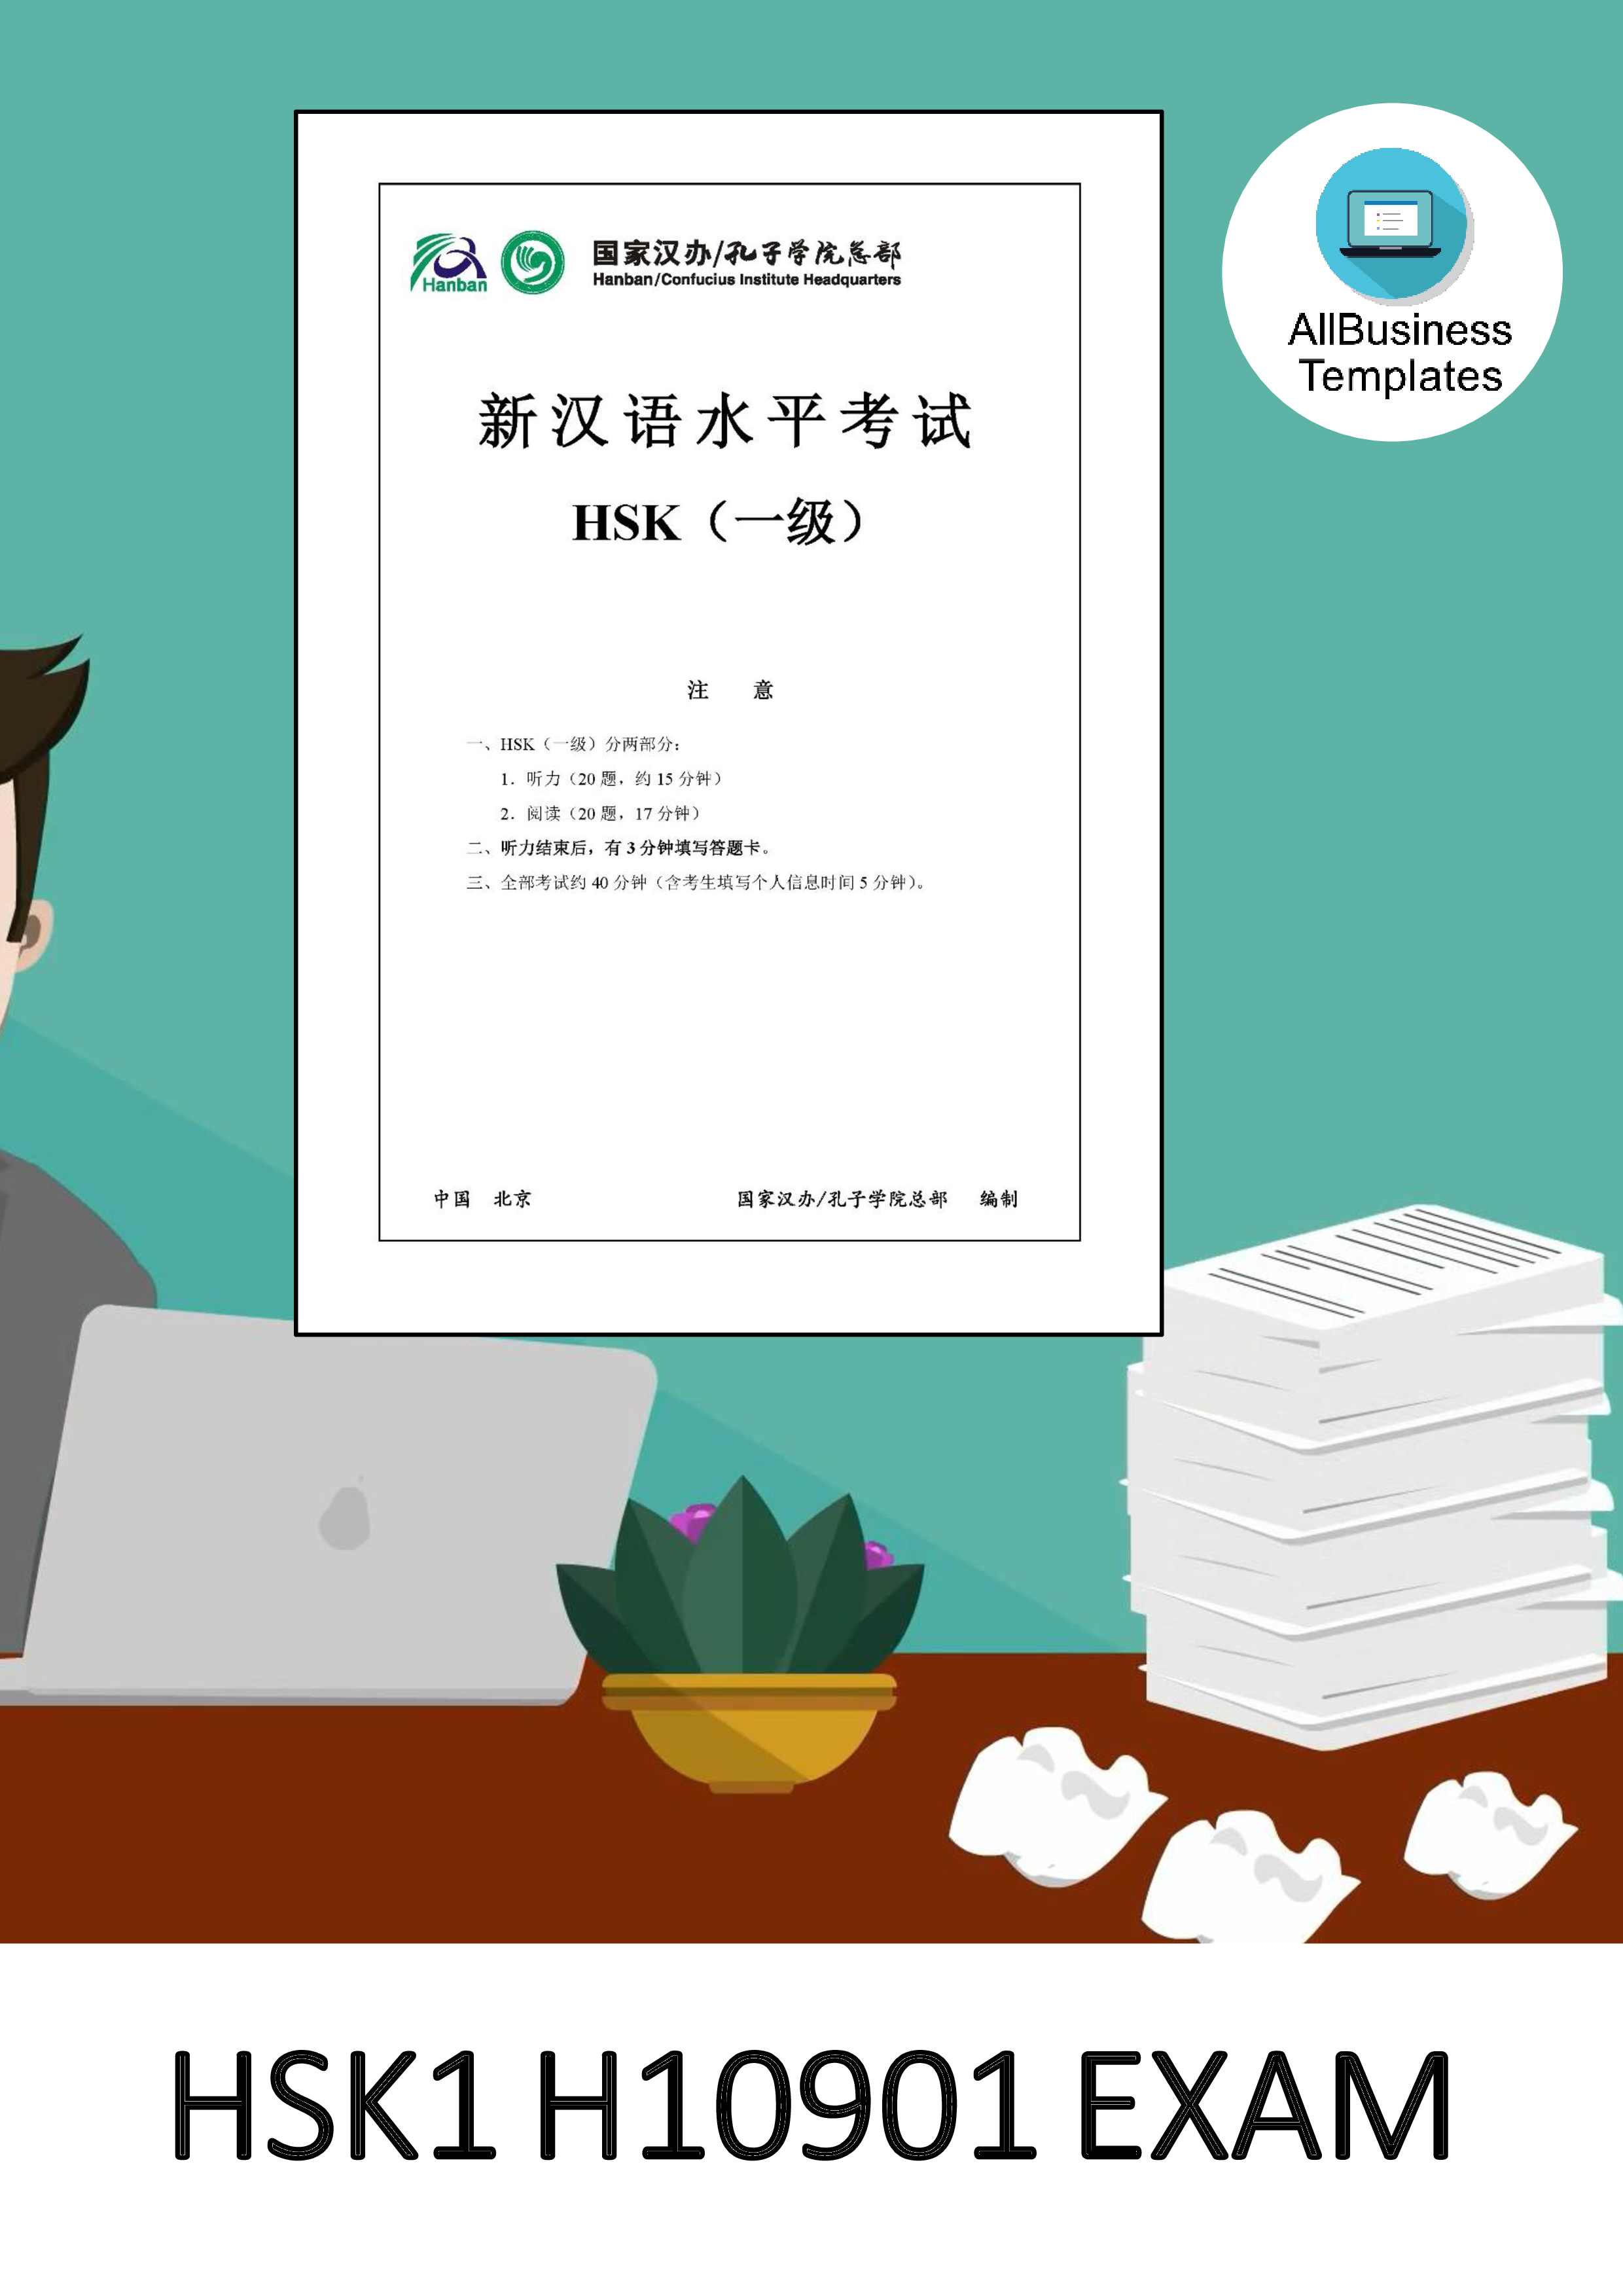 hsk1 chinese exam including answers h10901 exam template